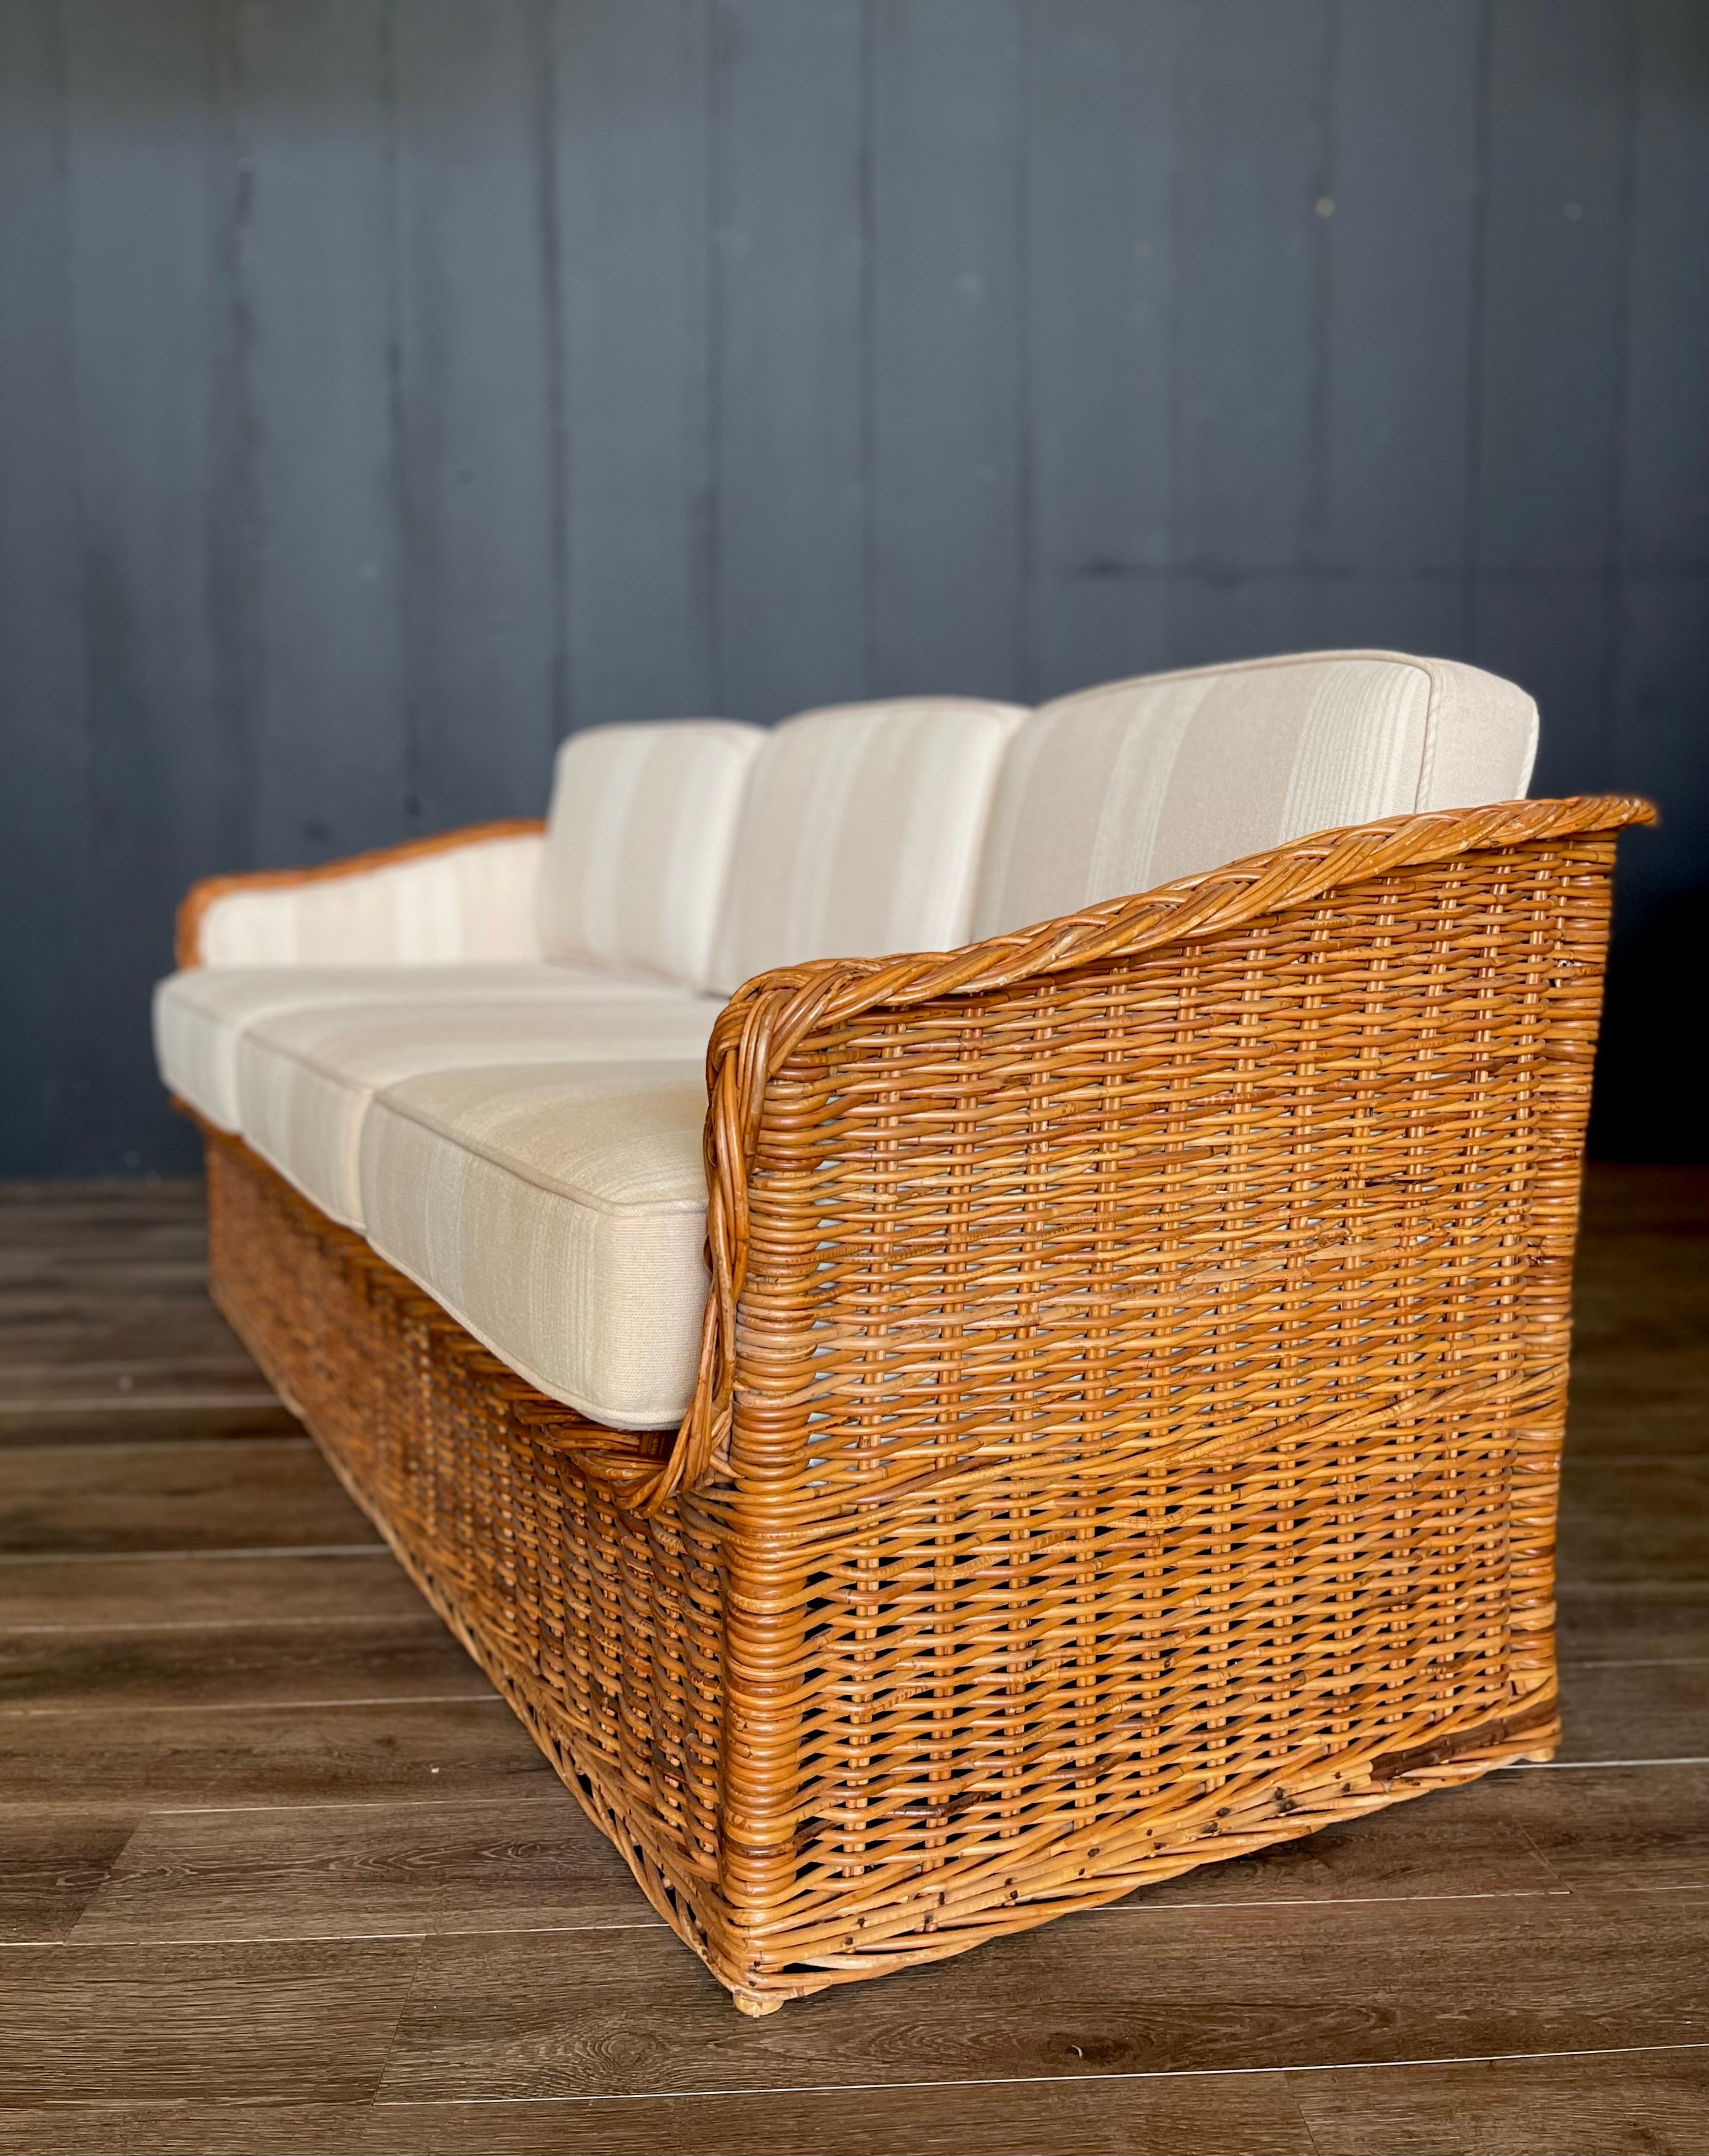 Add a touch of classic design to your retreat, whether by the water or in the mountains, with this stunning Michael Taylor style mid-century wicker rattan sofa, meticulously reupholstered in high-performance neutral striped fabric for durability and